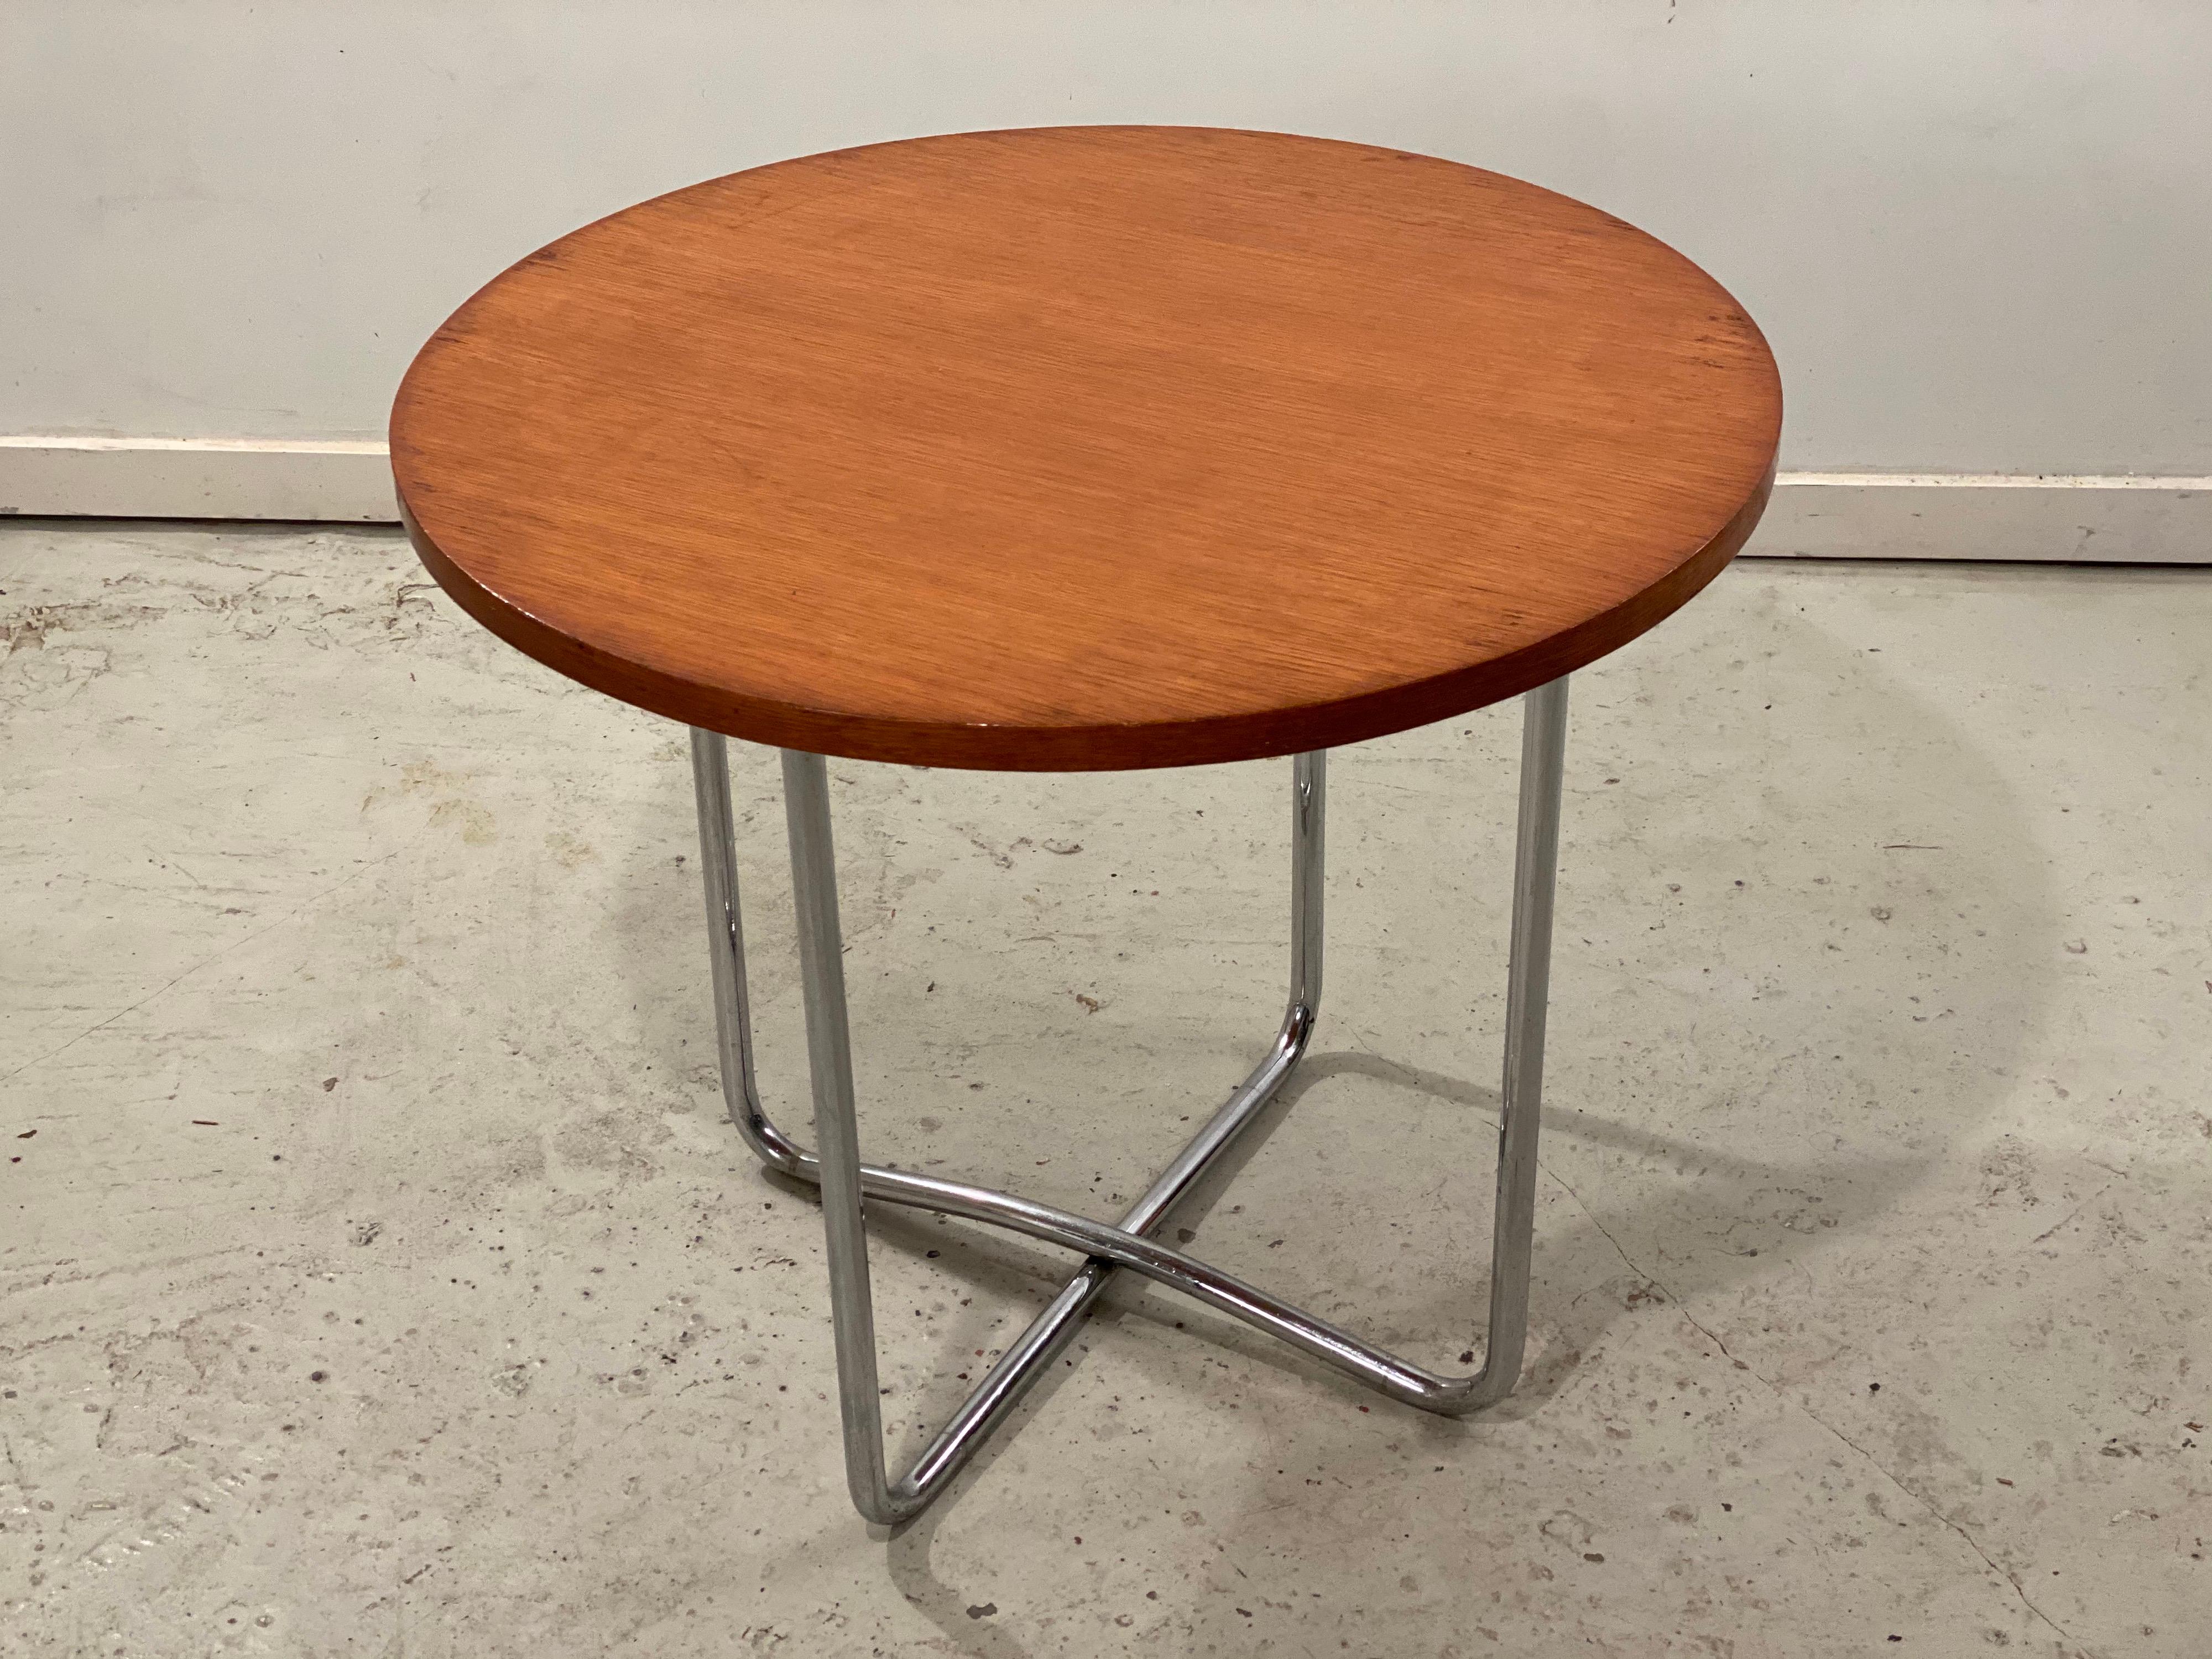 Beautiful tubular steel frame minimalistic Dutch design side table or coffee table manufactured by Auping circa 1950 and designed by Wim Rietveld. Table top in very good condition; the sticker tag is only partly visible.